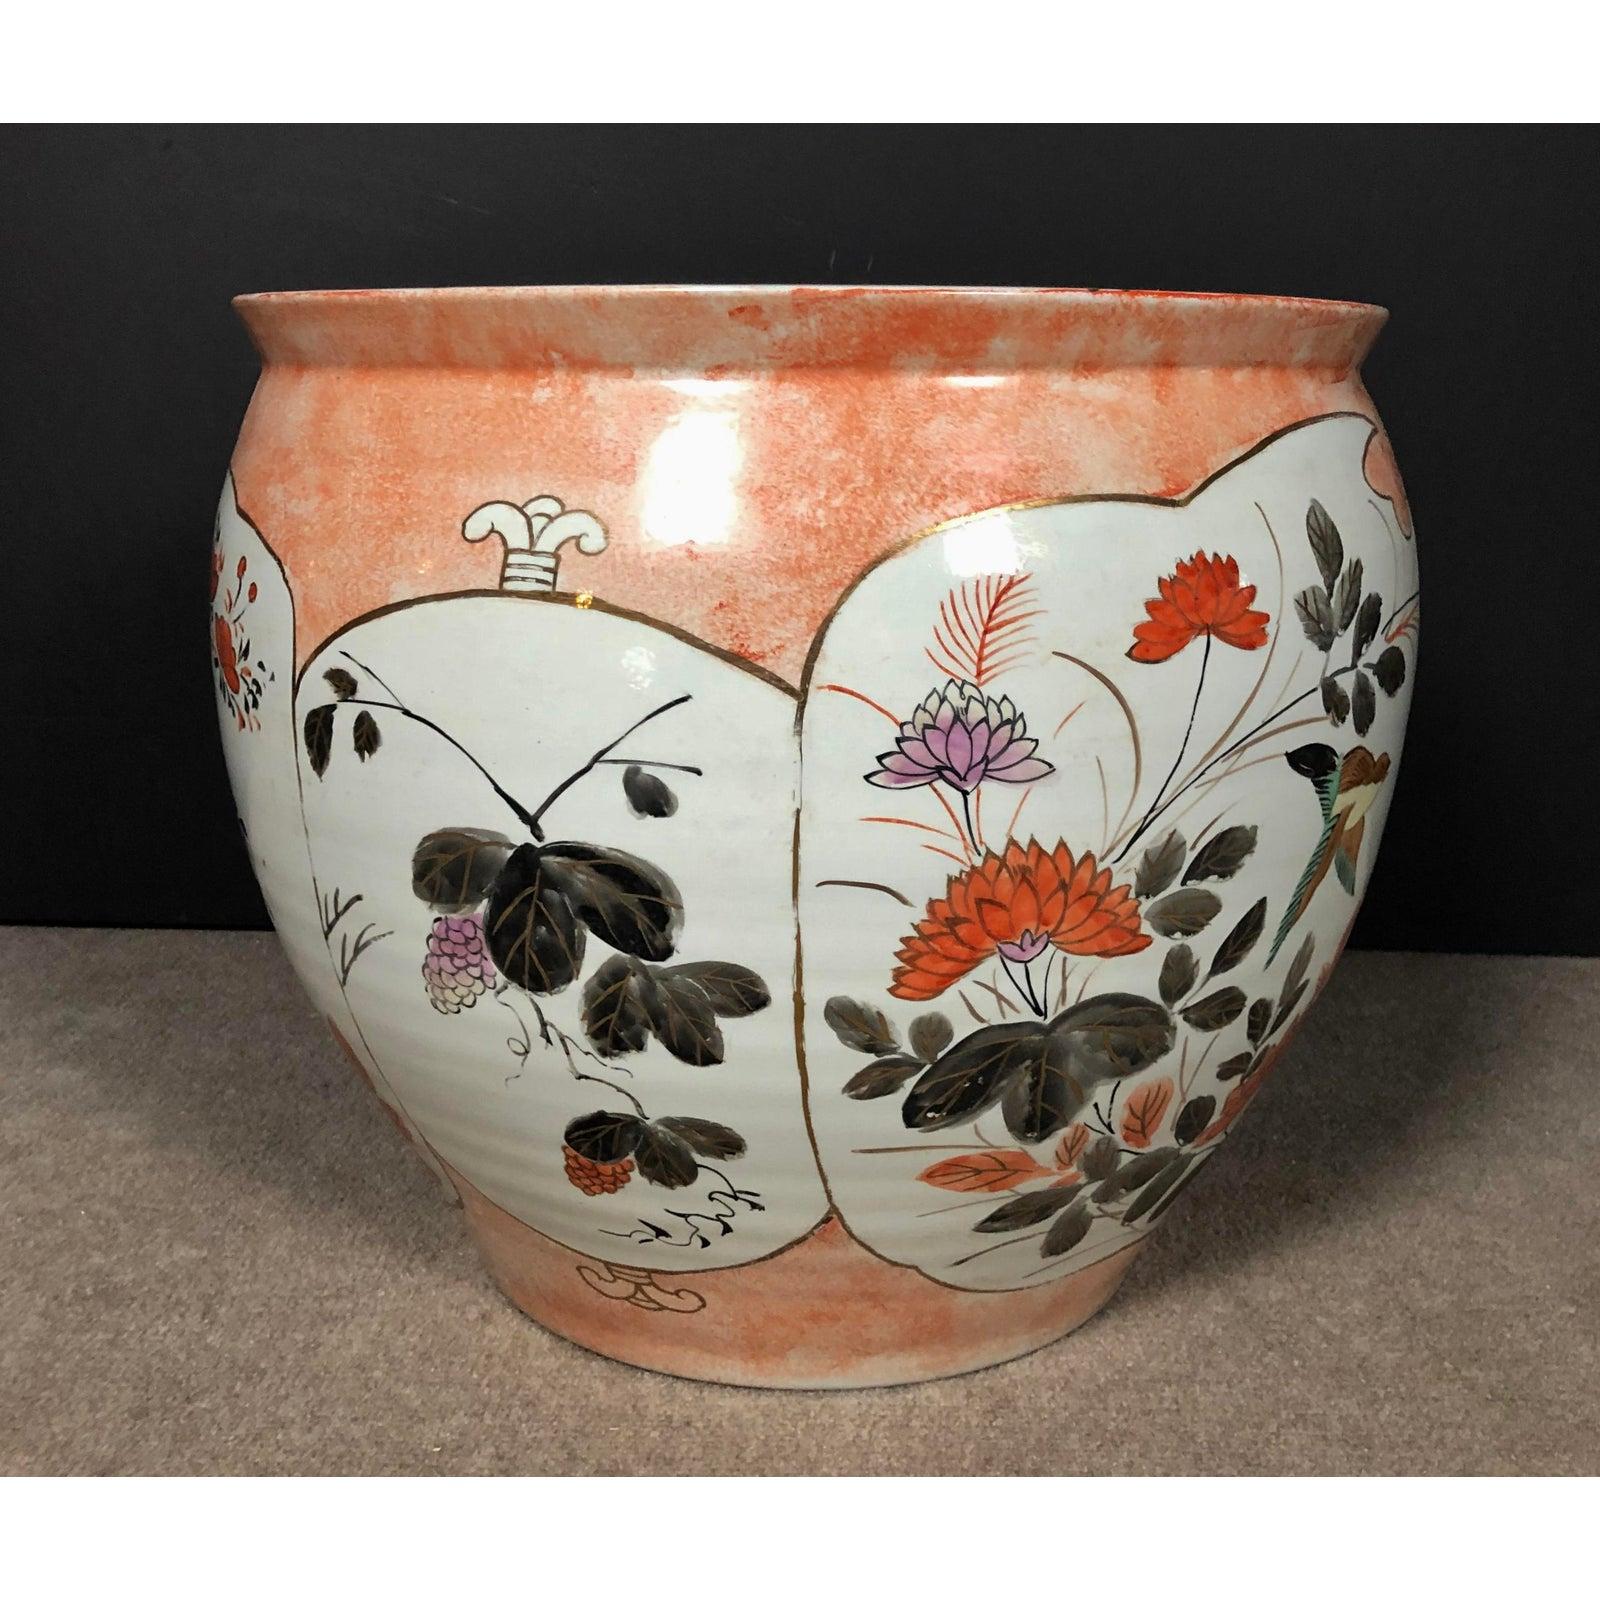 Large vintage orange and white porcelain Japanese fish bowl planter. Japanese porcelain fish bowl planter with floral and bird motif. Decoration continues on top rim as well as inside and bottom. Makers mark on bottom.